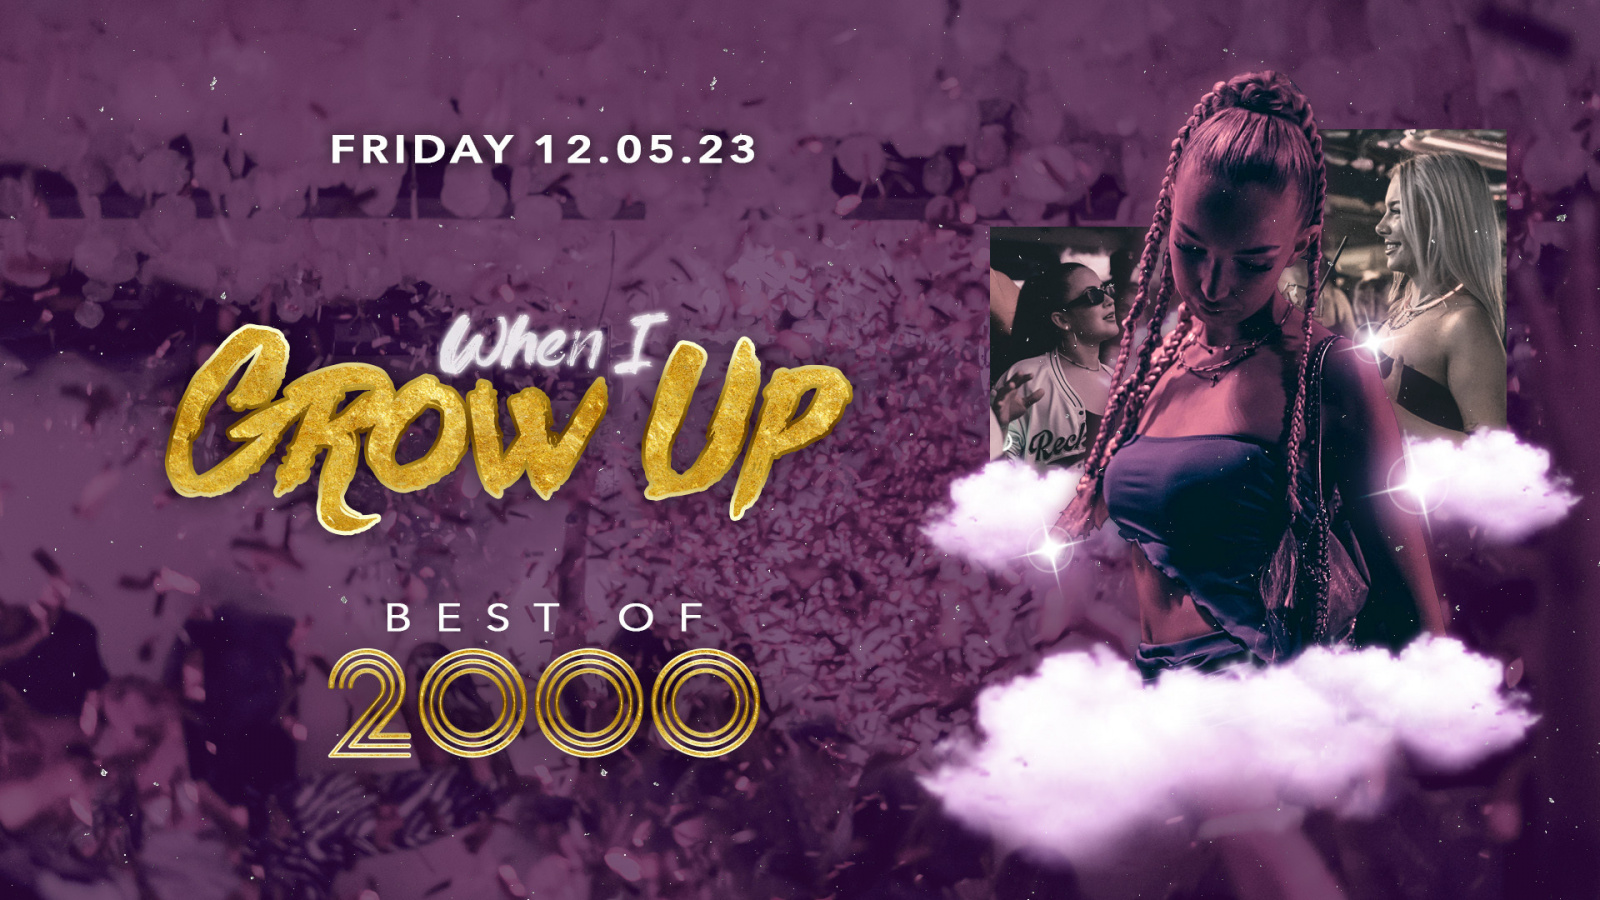 WHEN I GROW UP - 2000er EDITION